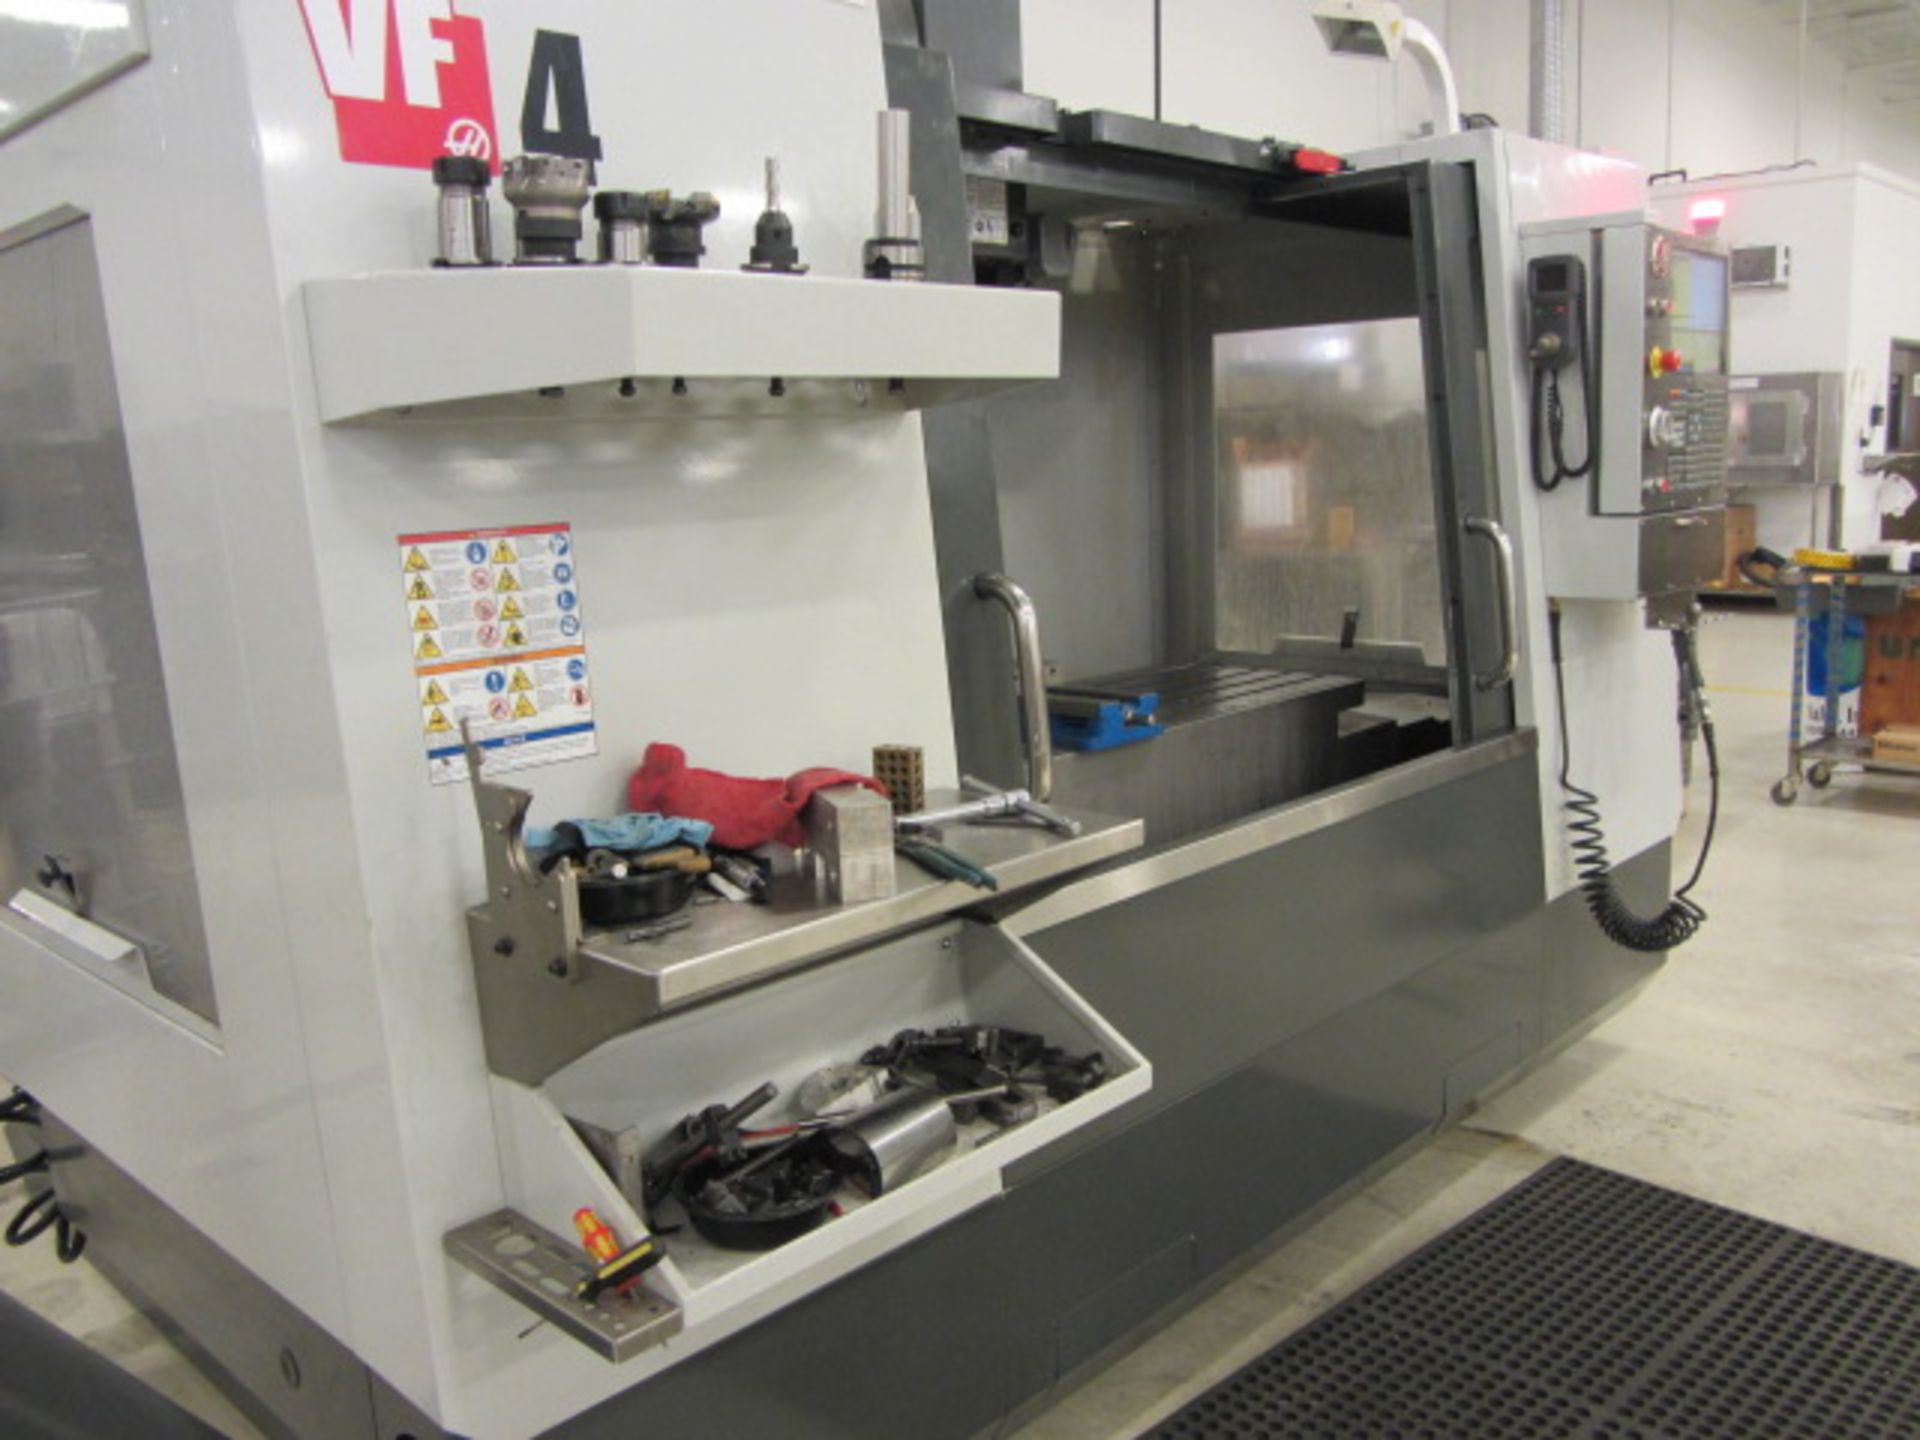 Haas VF-4 CNC Vertical Machining Center with 52'' x 18'' Table, #40 Taper Spindle Speeds to 8100 - Image 6 of 9